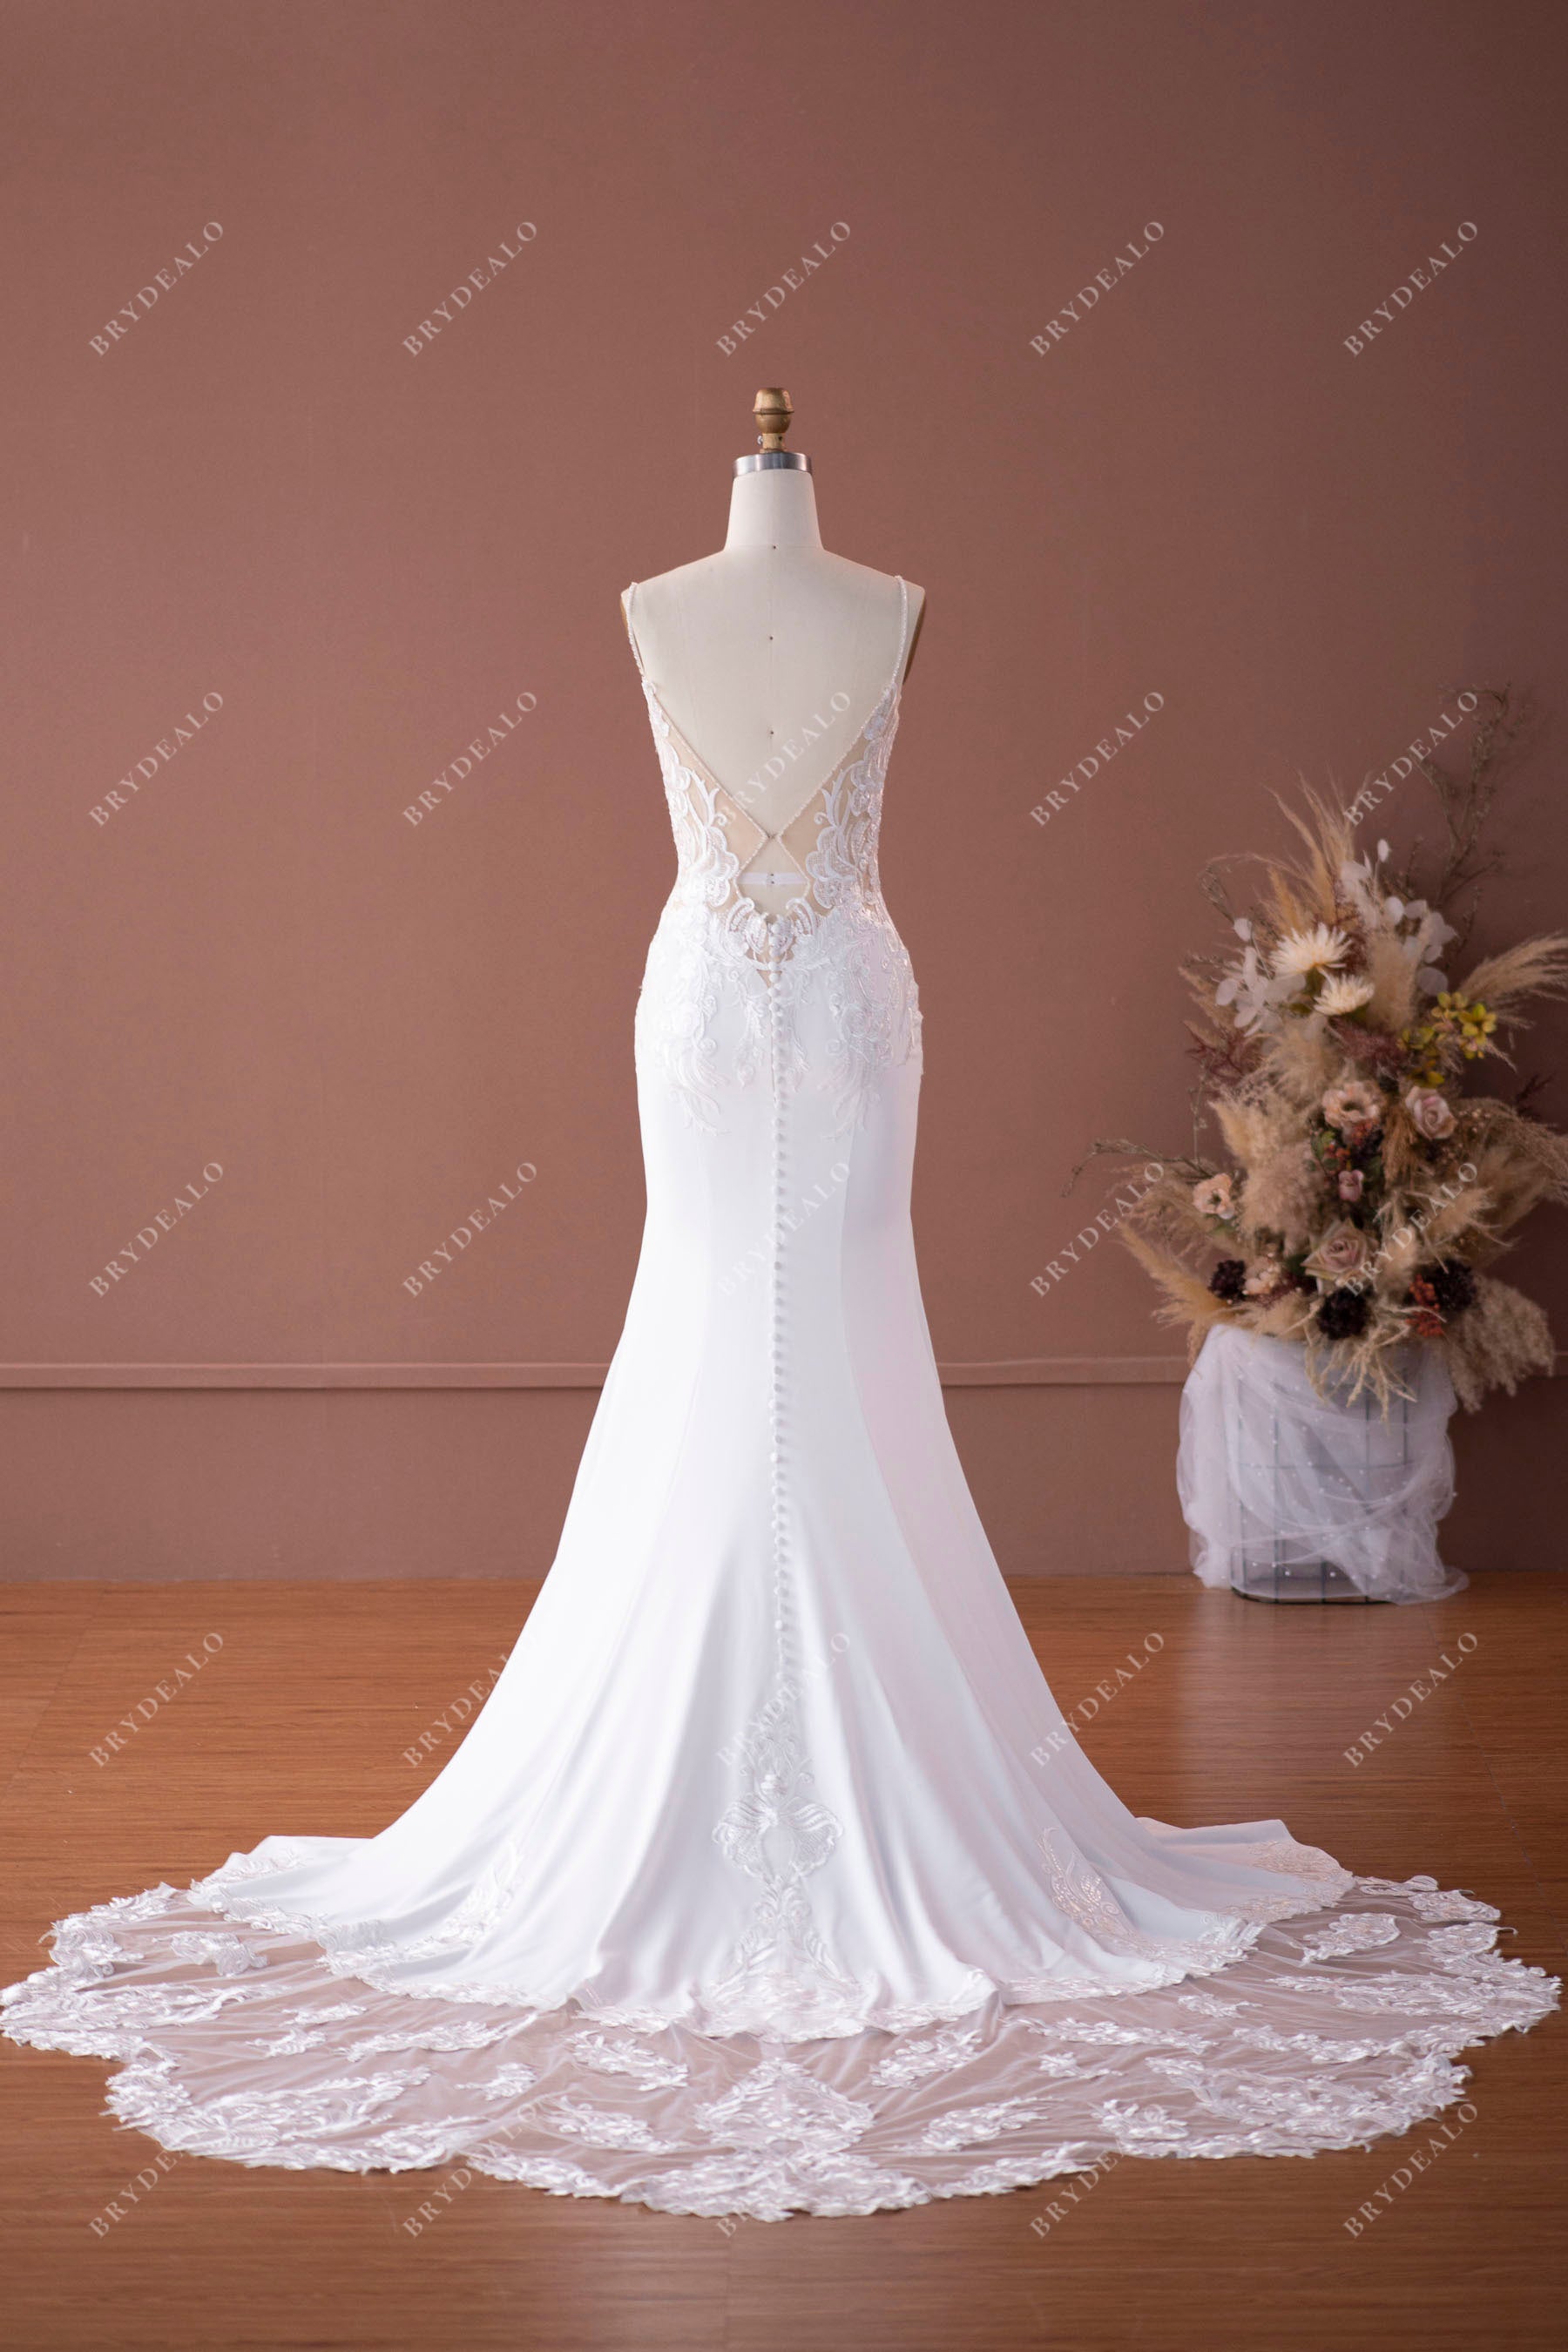 Crepe Long Sleeve Bridal Wedding Gown With Open Back, Winter